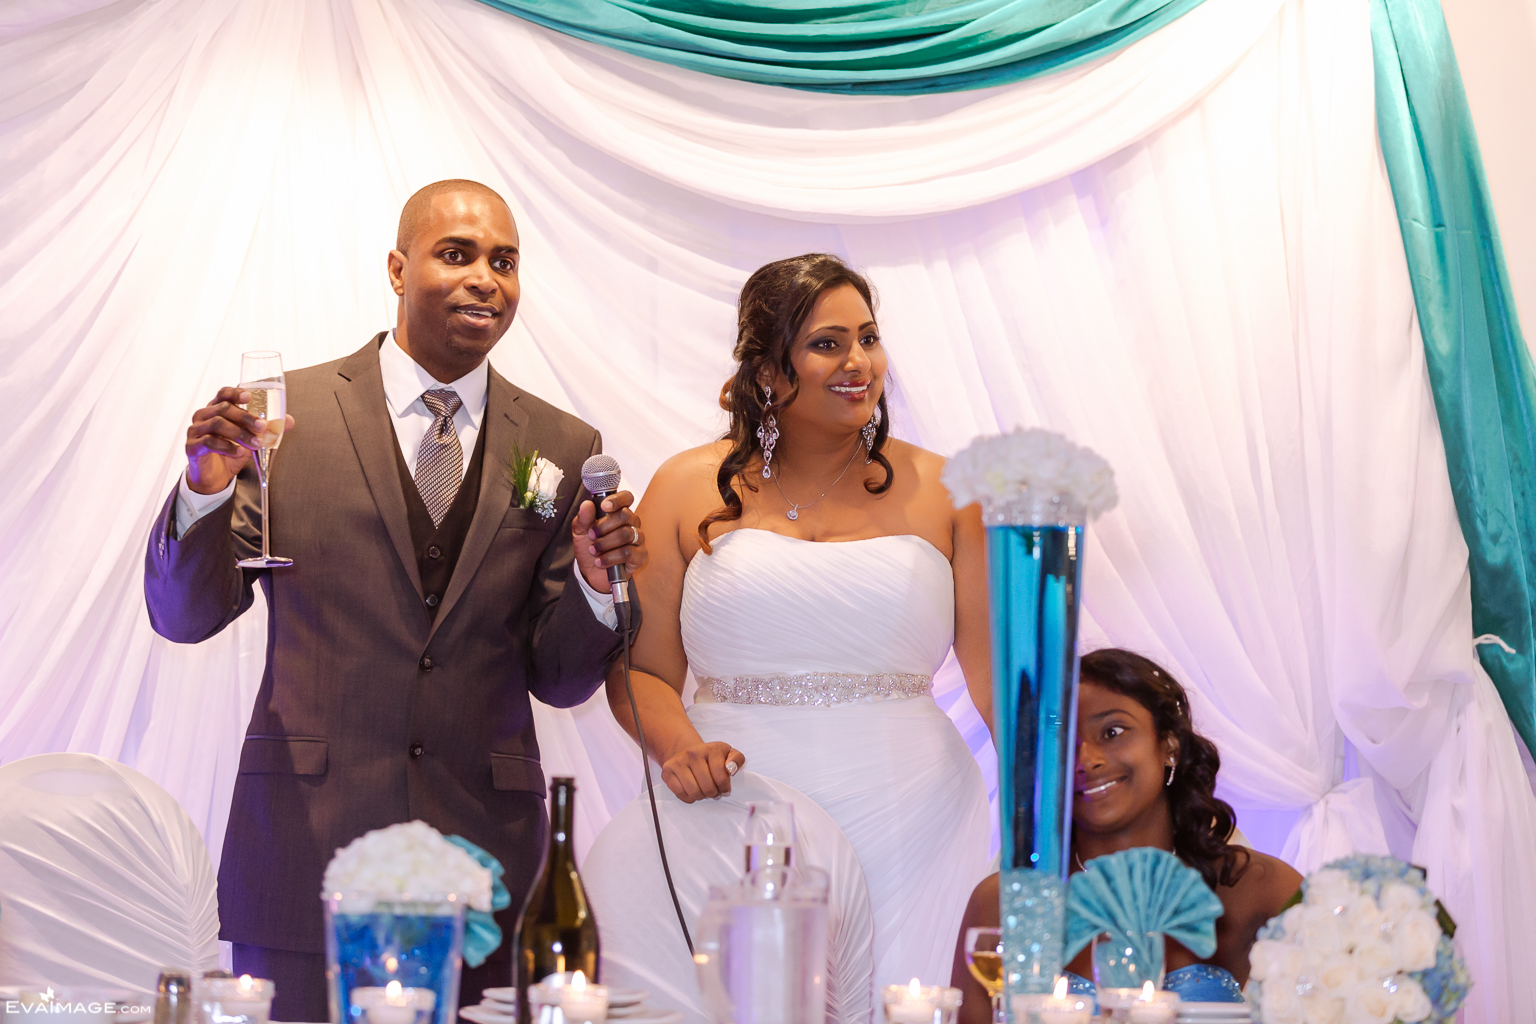  Maple Banquet Hall Mississauga Wedding Reception. Ria & Brian, May 16, 2015. By EvaImage Photography 